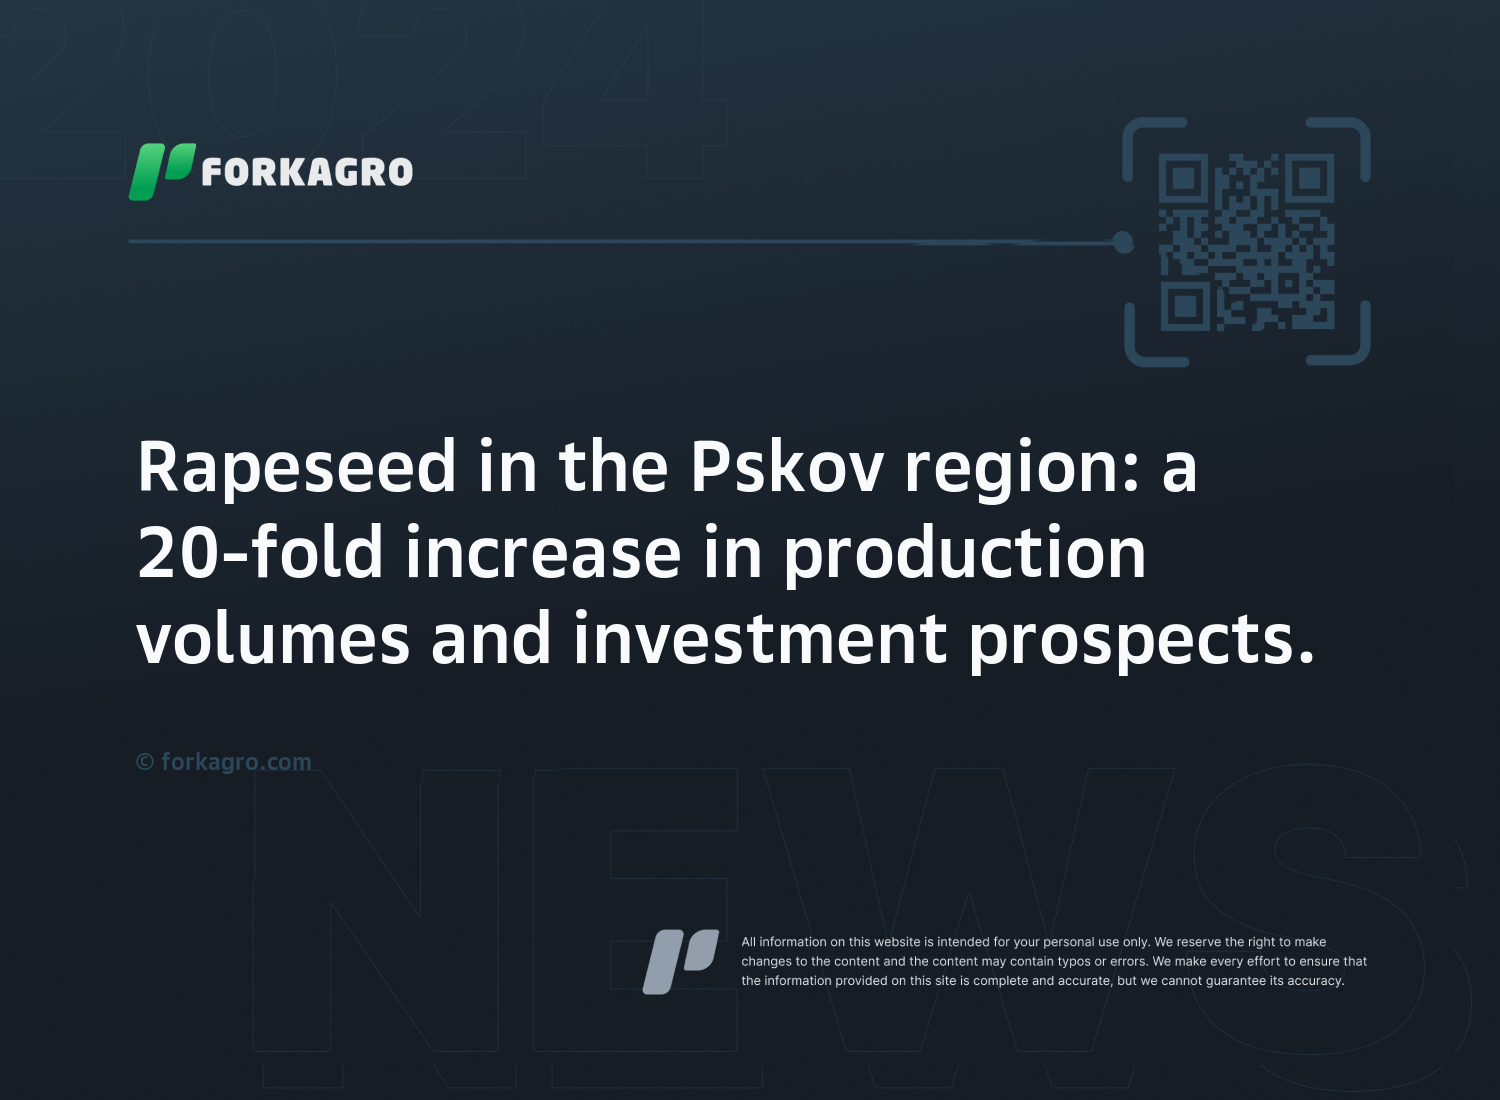 Rapeseed in the Pskov region: a 20-fold increase in production volumes and investment prospects.